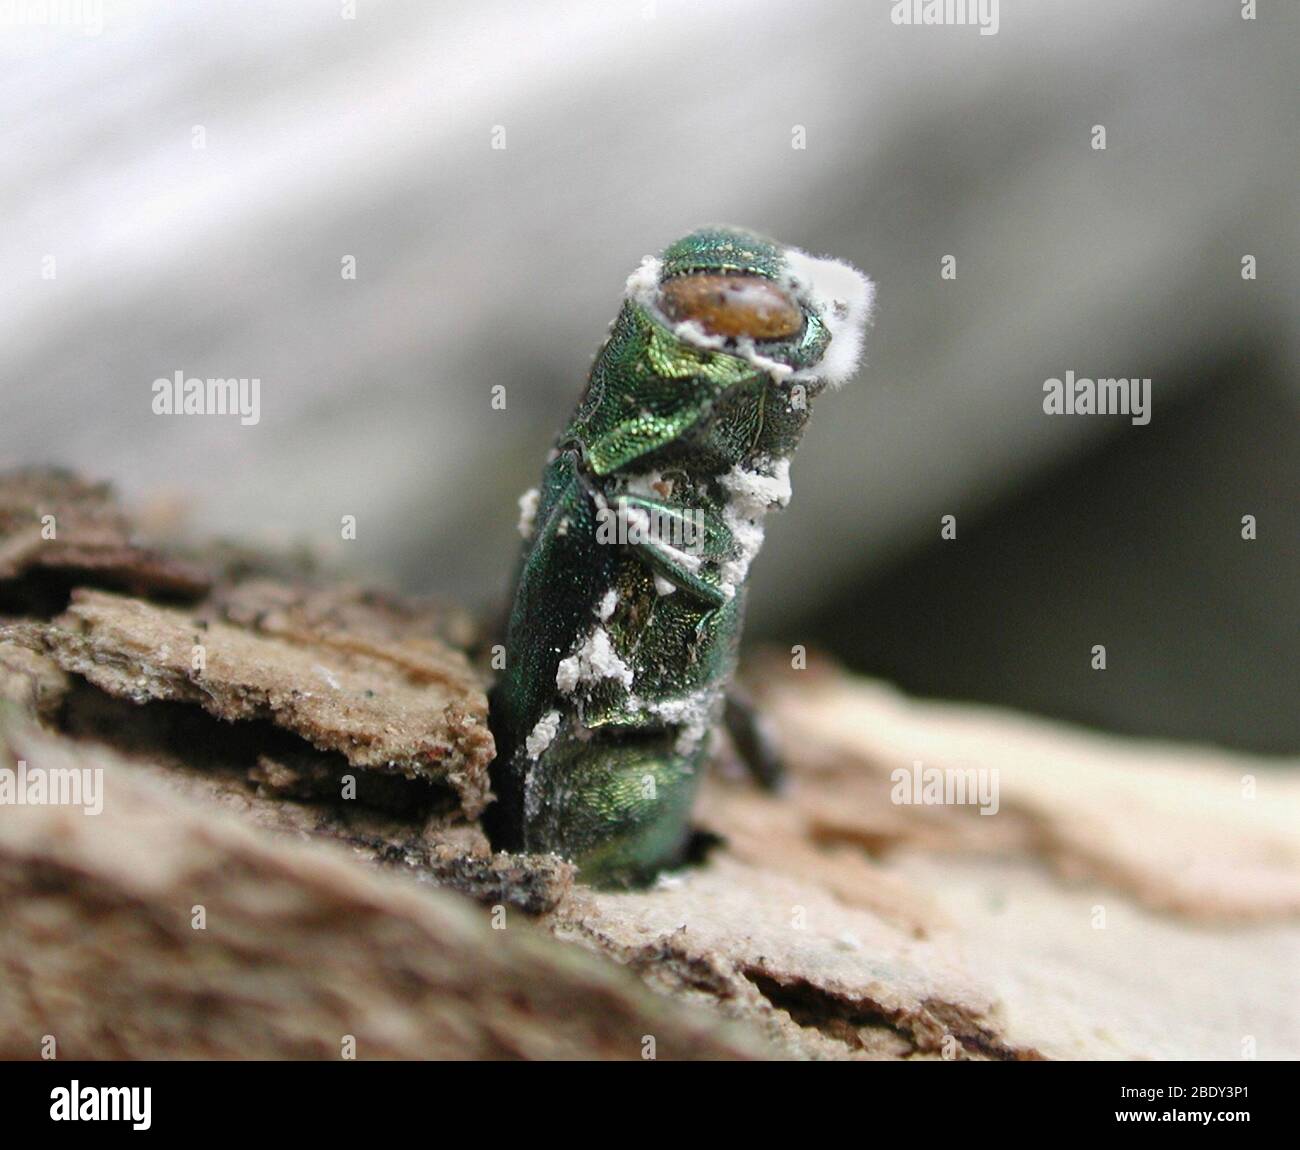 Emerging Ash Borer with Fungus Stock Photo